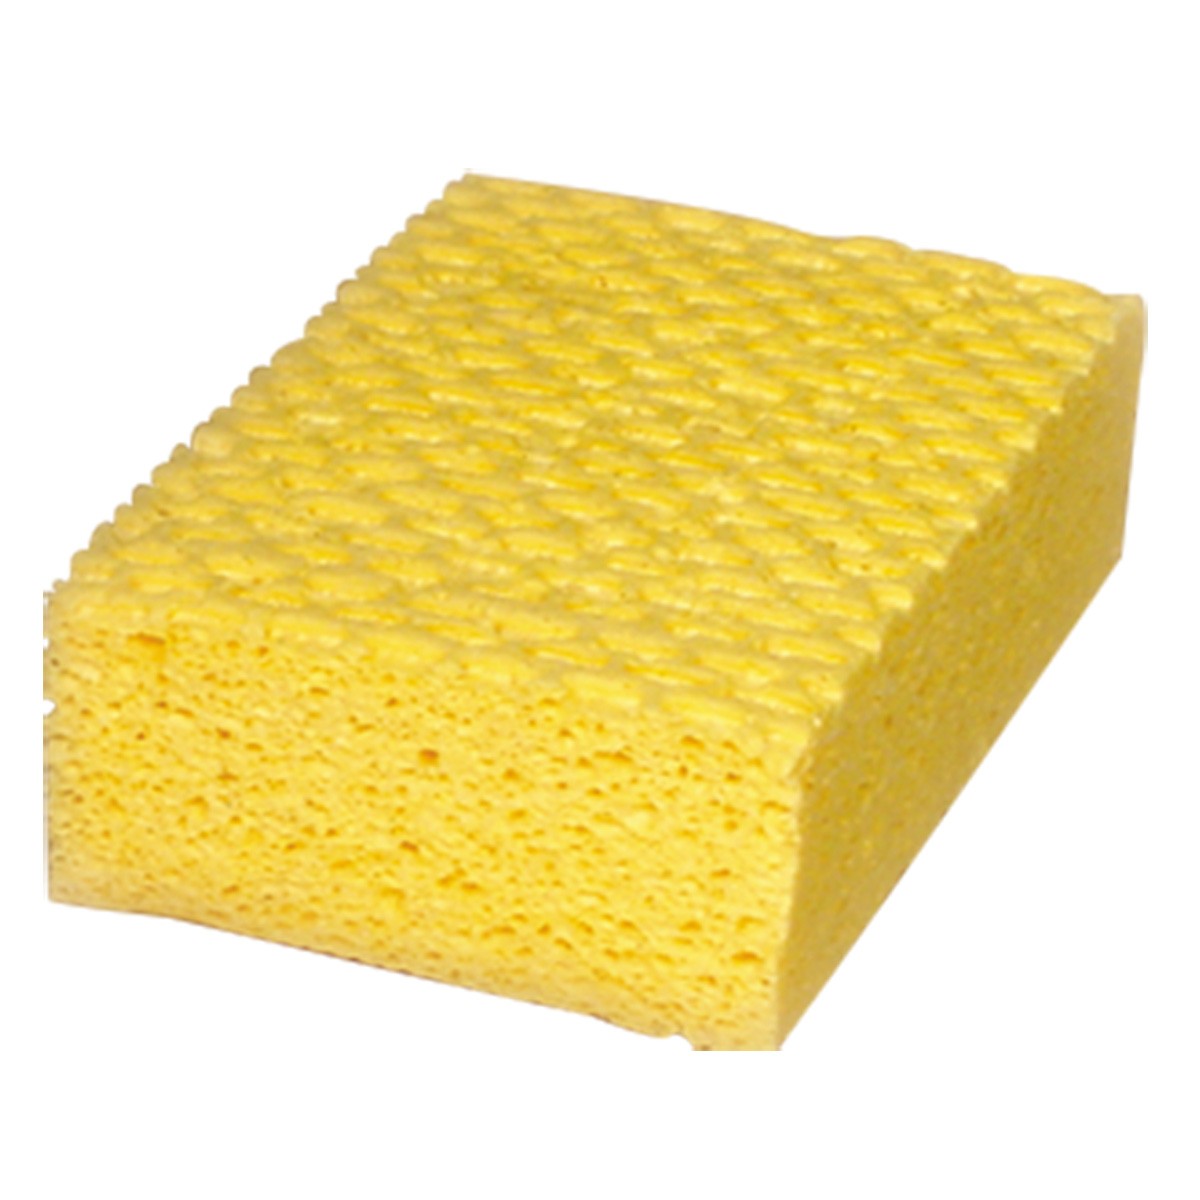 Small UltraSource 501535 Cellulose Block Sponges Pack of 24